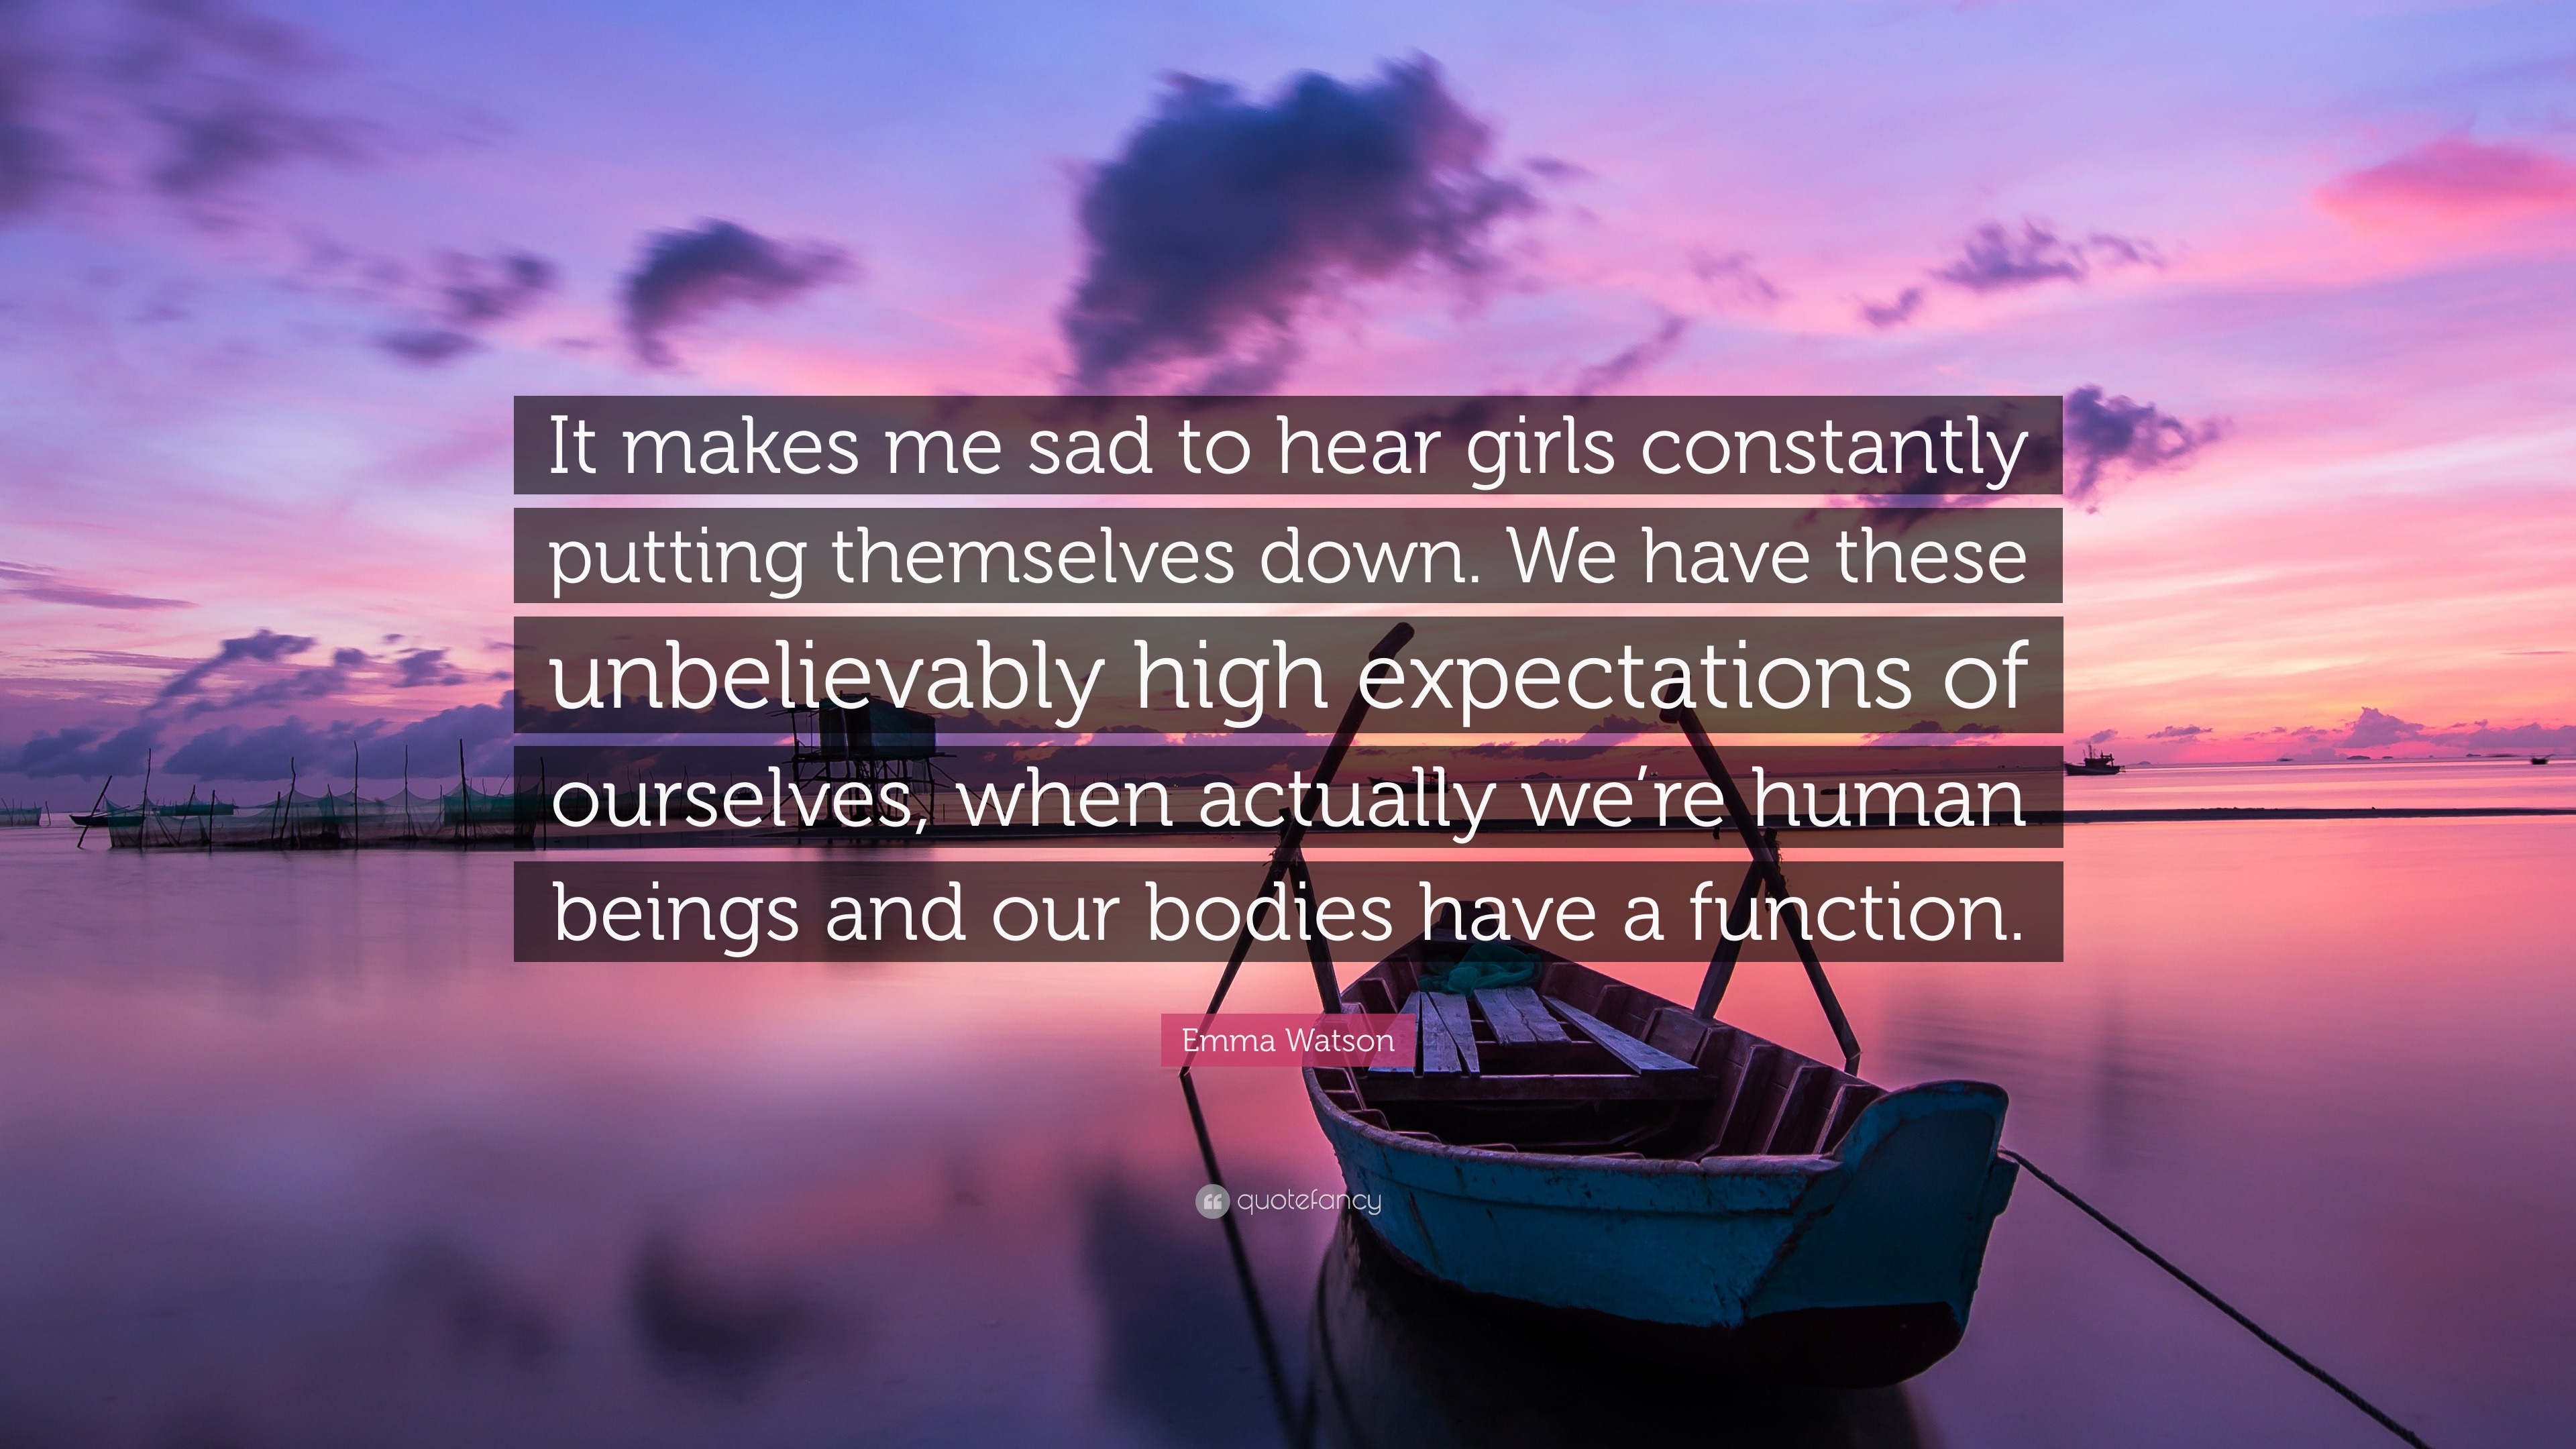 Emma Watson Quote: “It makes me sad to hear girls constantly putting ...